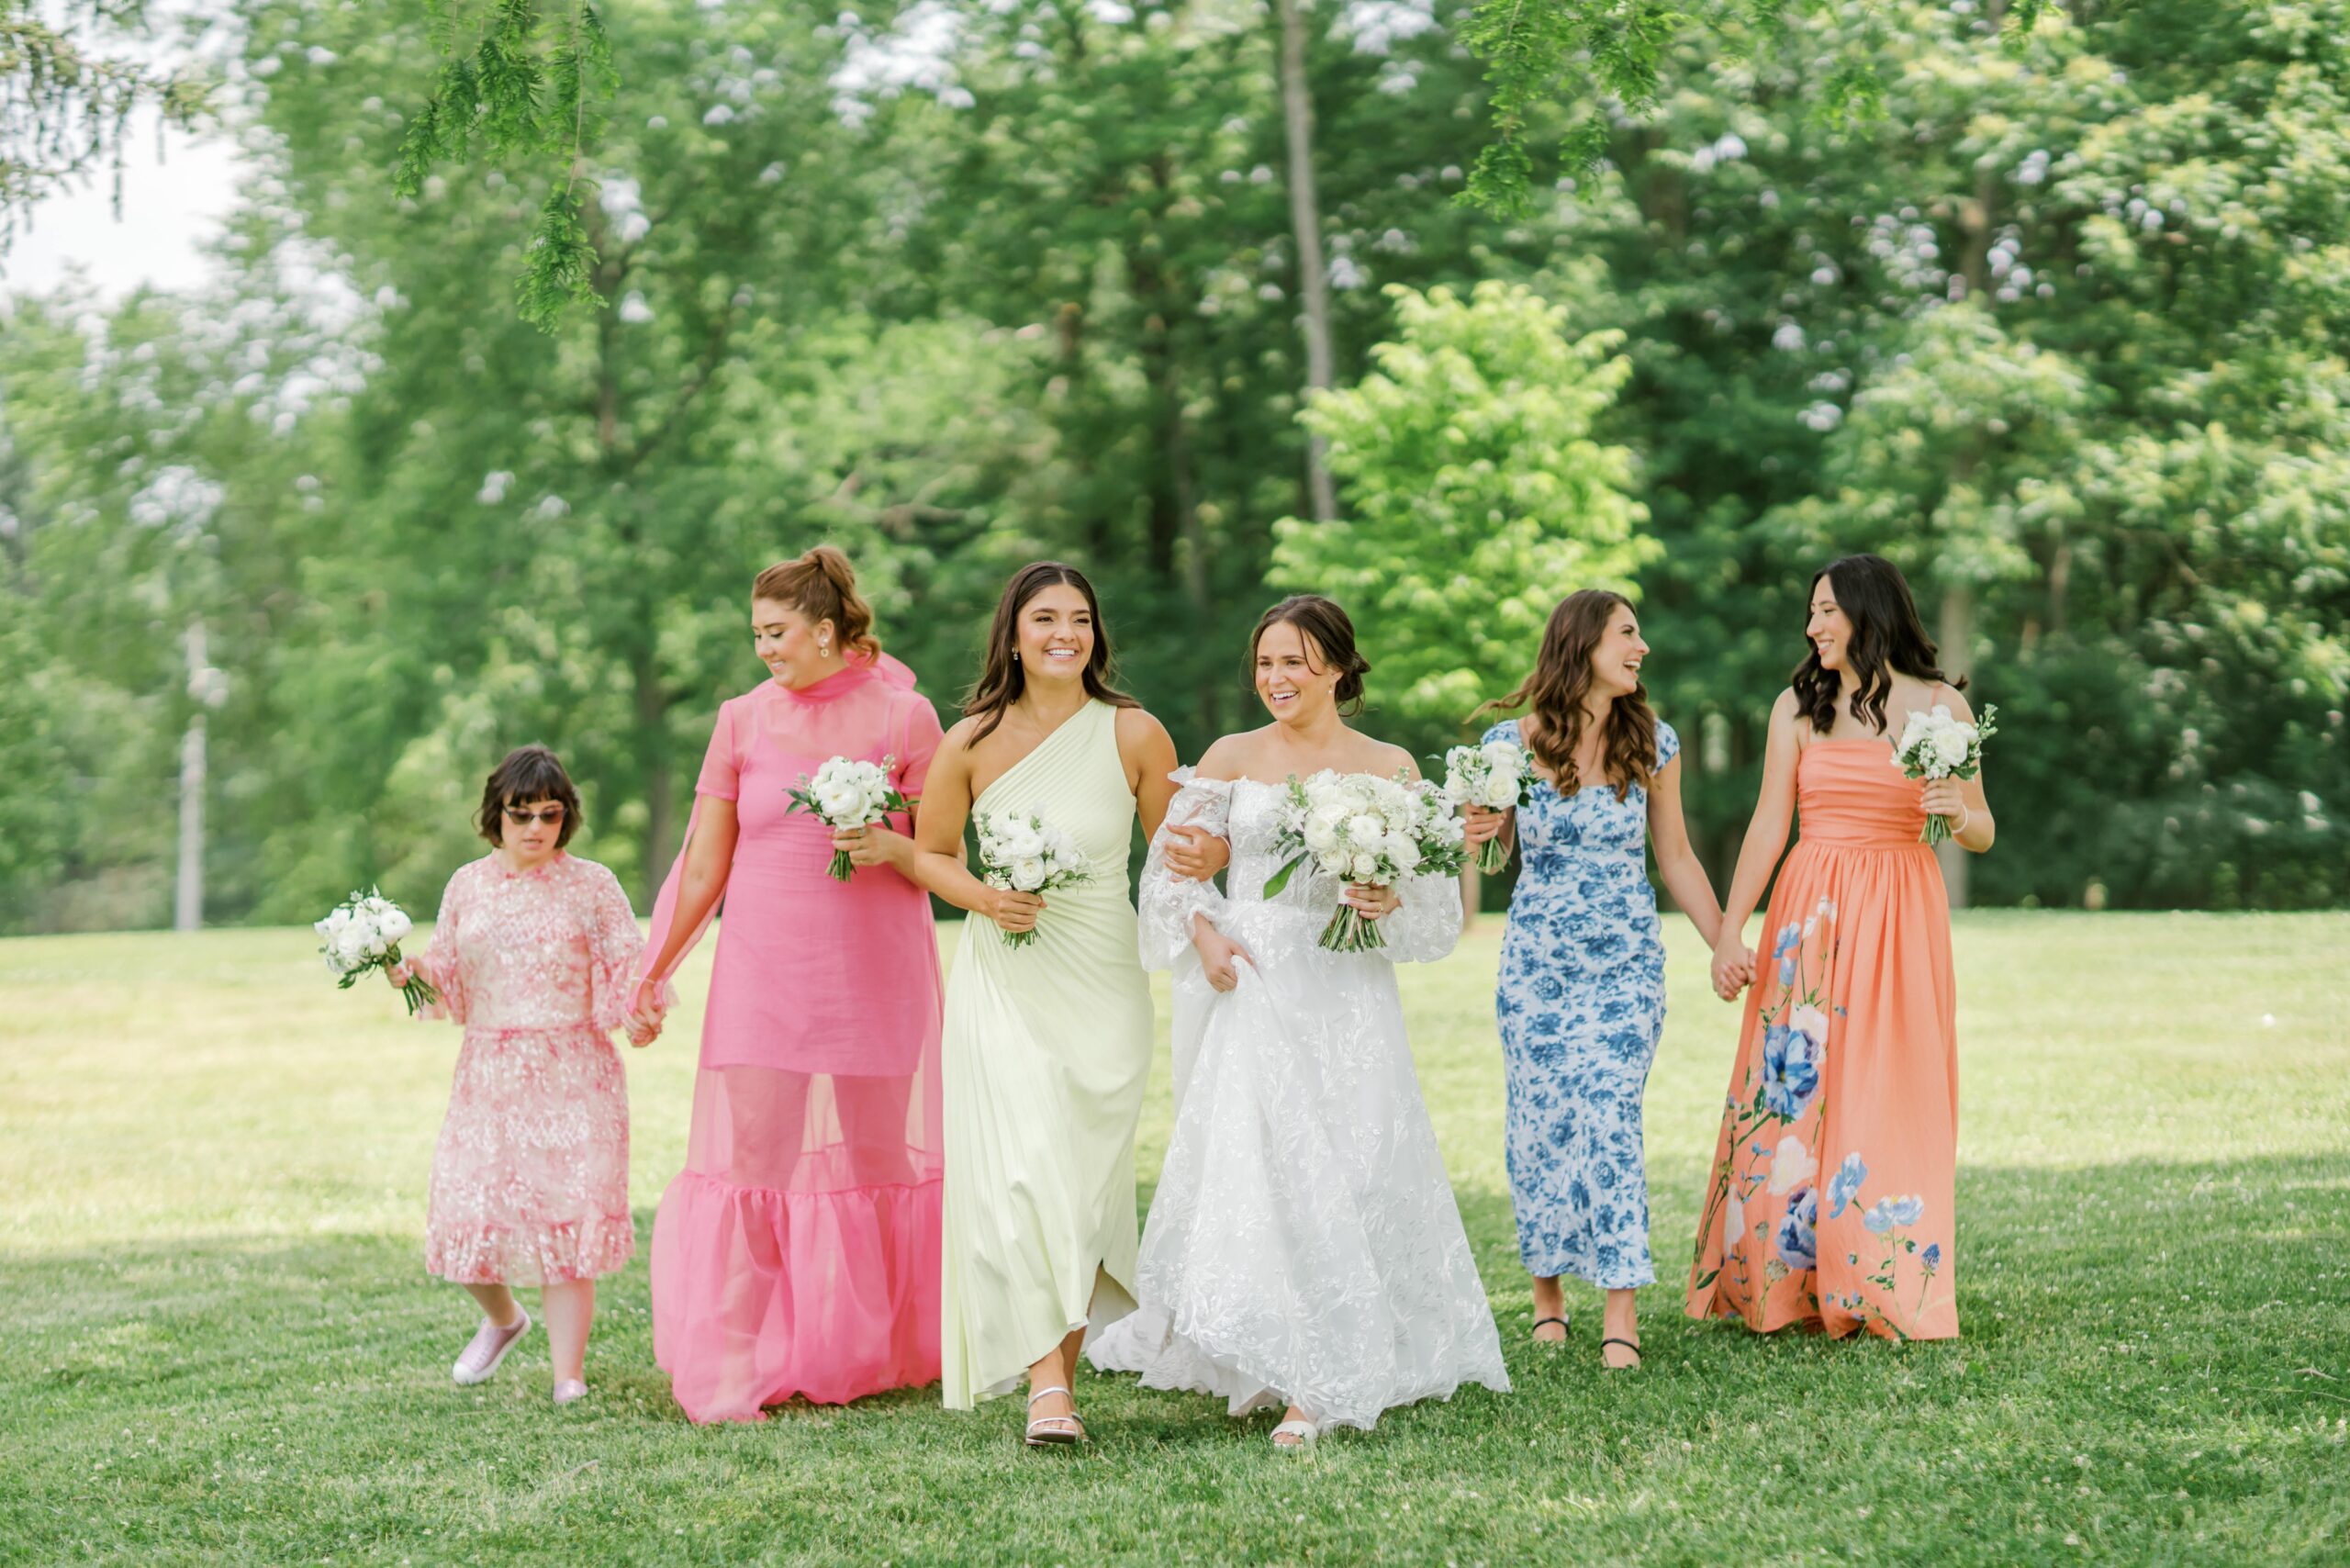 Bride with bridesmaids in mismatched bridesmaids dresses